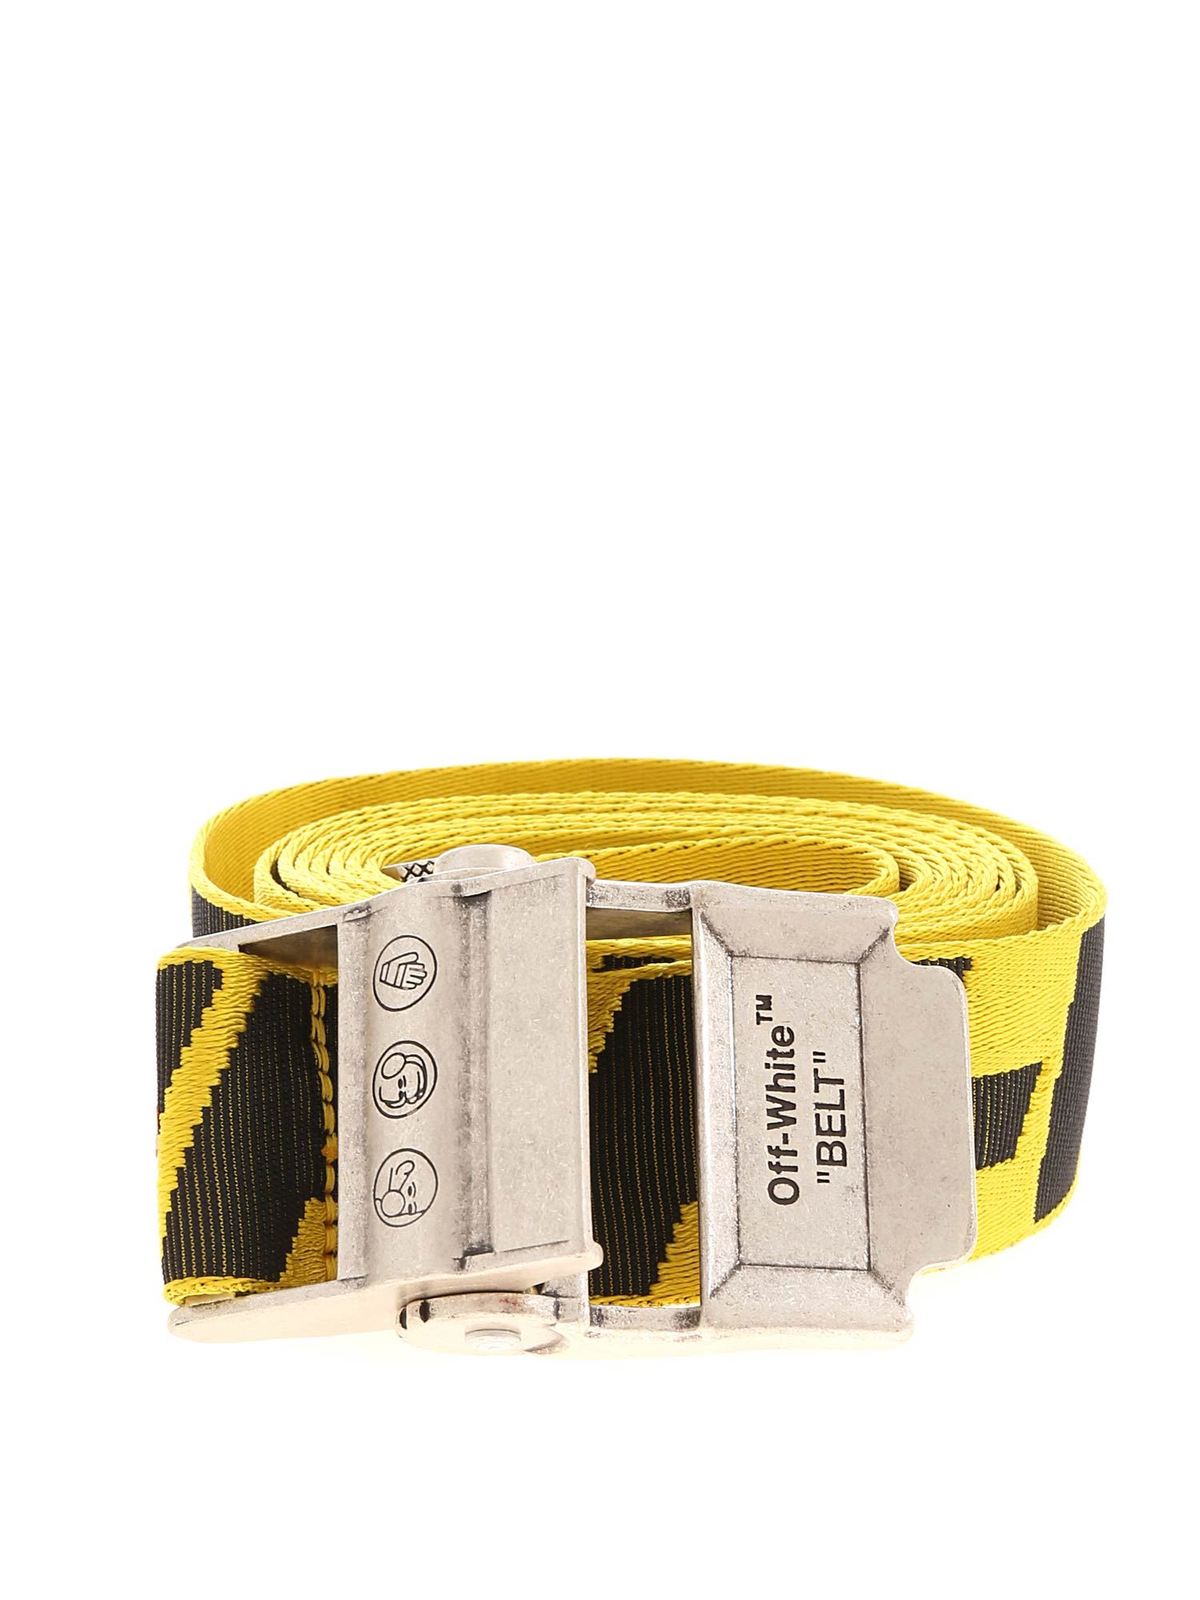 OFF-WHITE 20 INDUSTRIAL BELT IN YELLOW AND BLACK